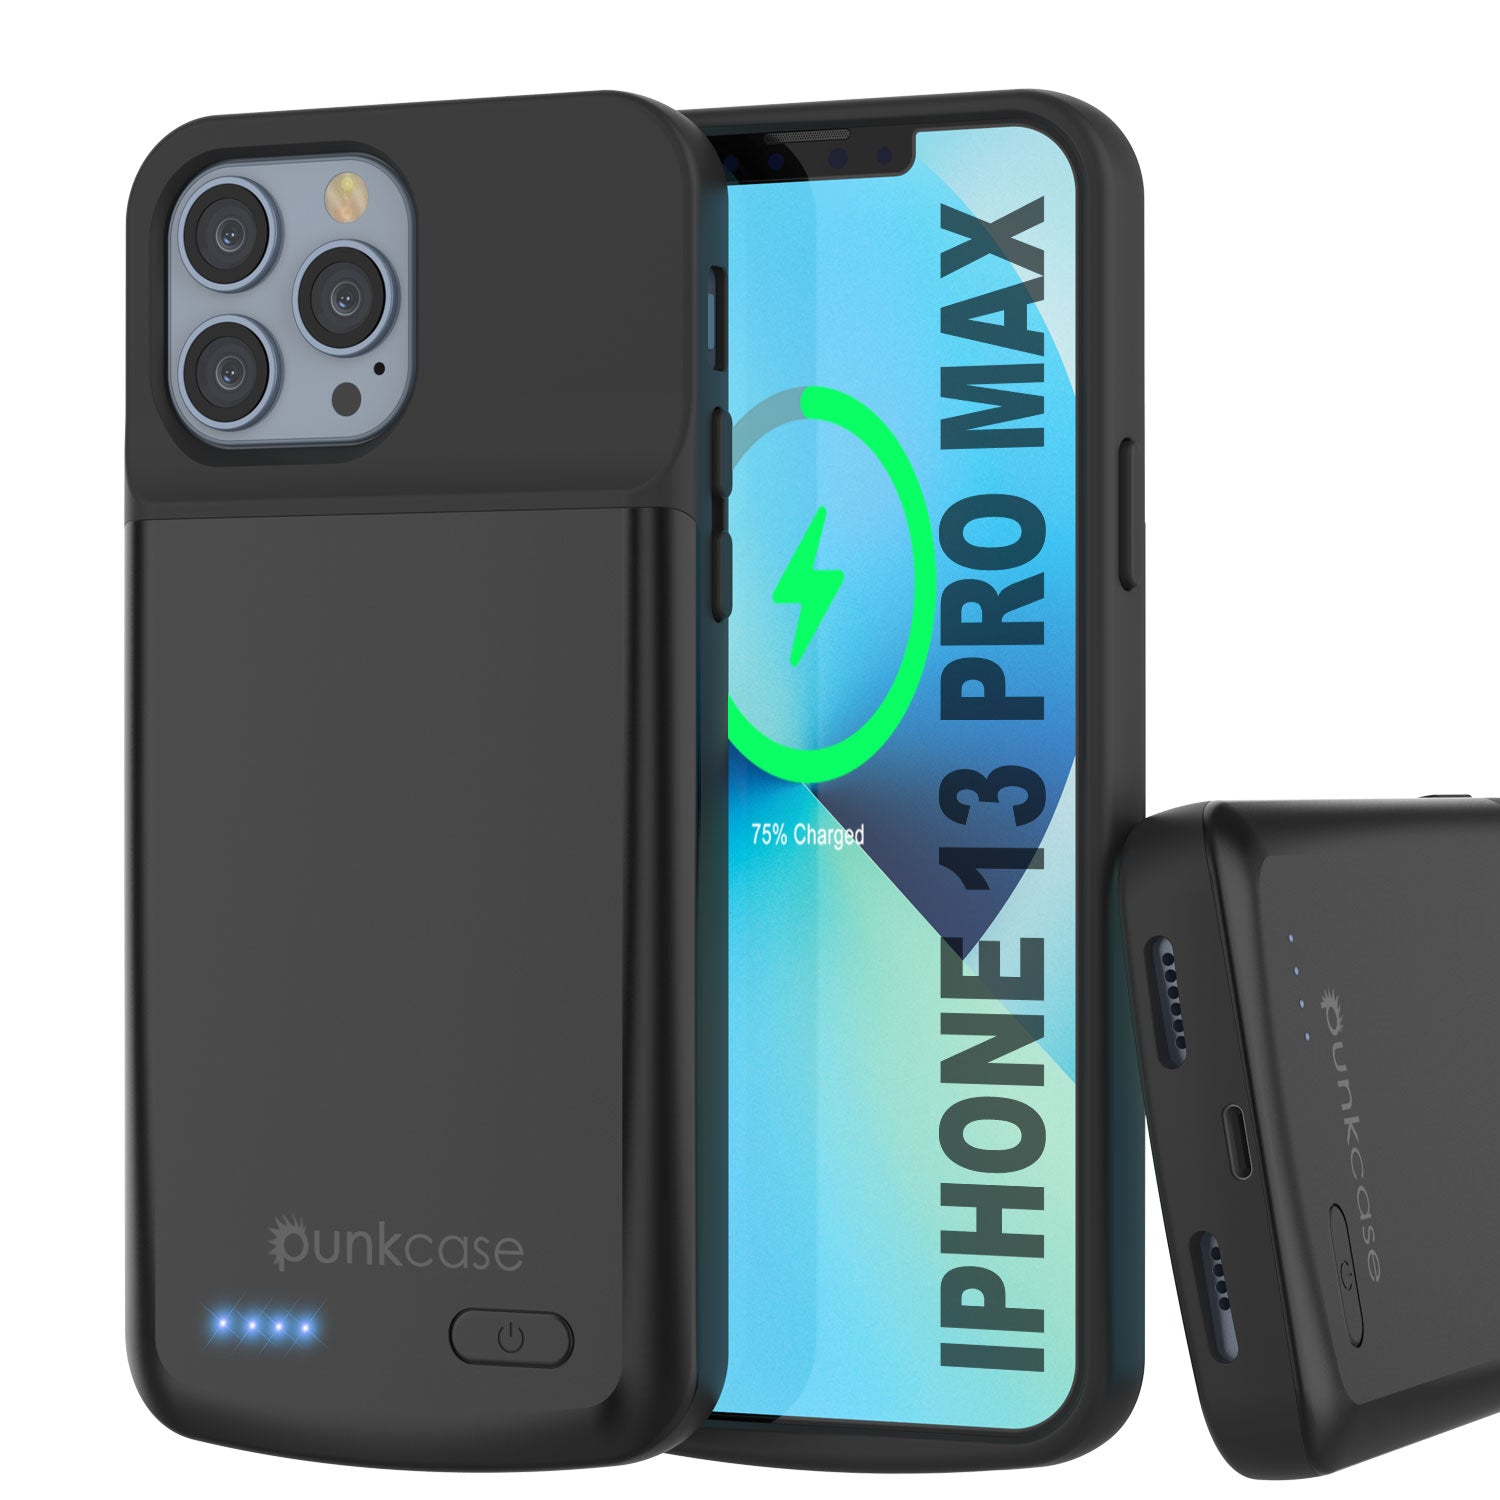 https://www.punkcase.com/cdn/shop/products/iPhone-13-pro-max-battery-case-punkjuice-4800mah-fast-charging-power-bank-screen-protector-integrated-kickstand-usb-lightning-port-slim-secure-reliable-designed-for-apple-iPhone-13-pr.jpg?v=1674453665